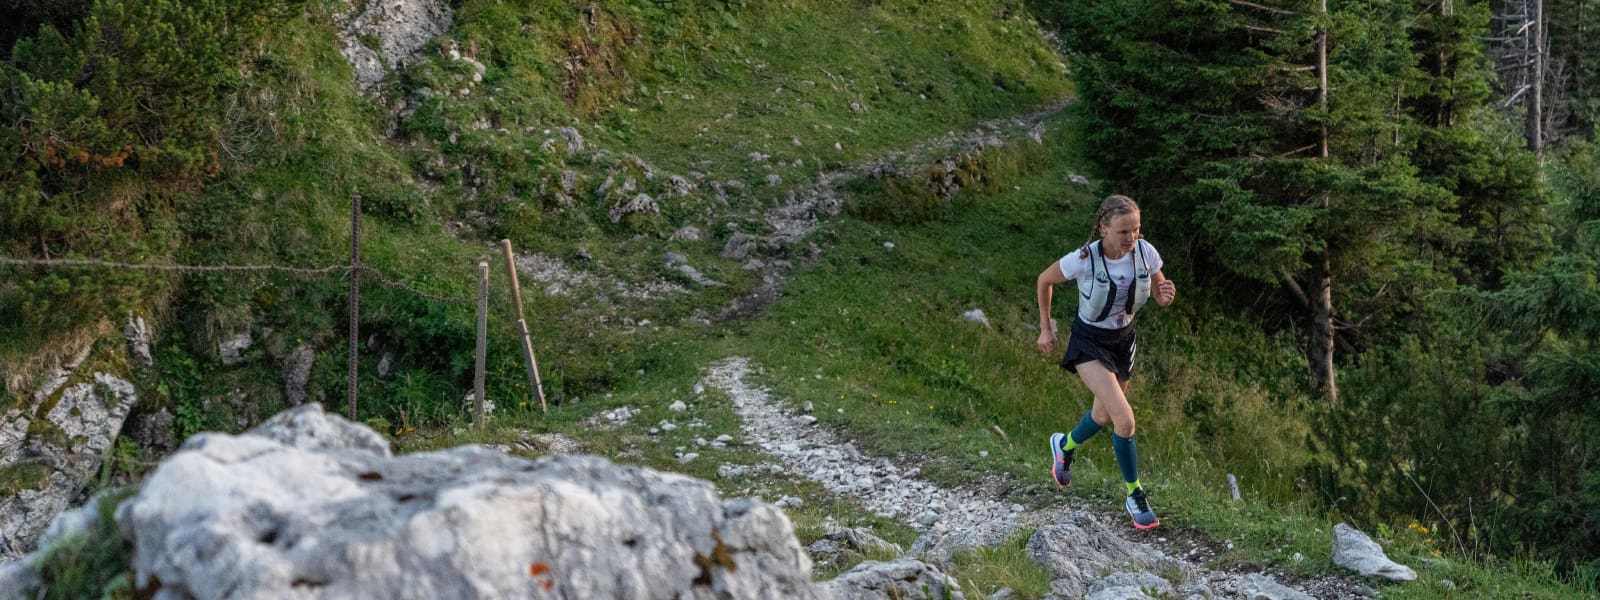 The runner has Trail Run socks and jogged over a stony, hilly terrain in the forest